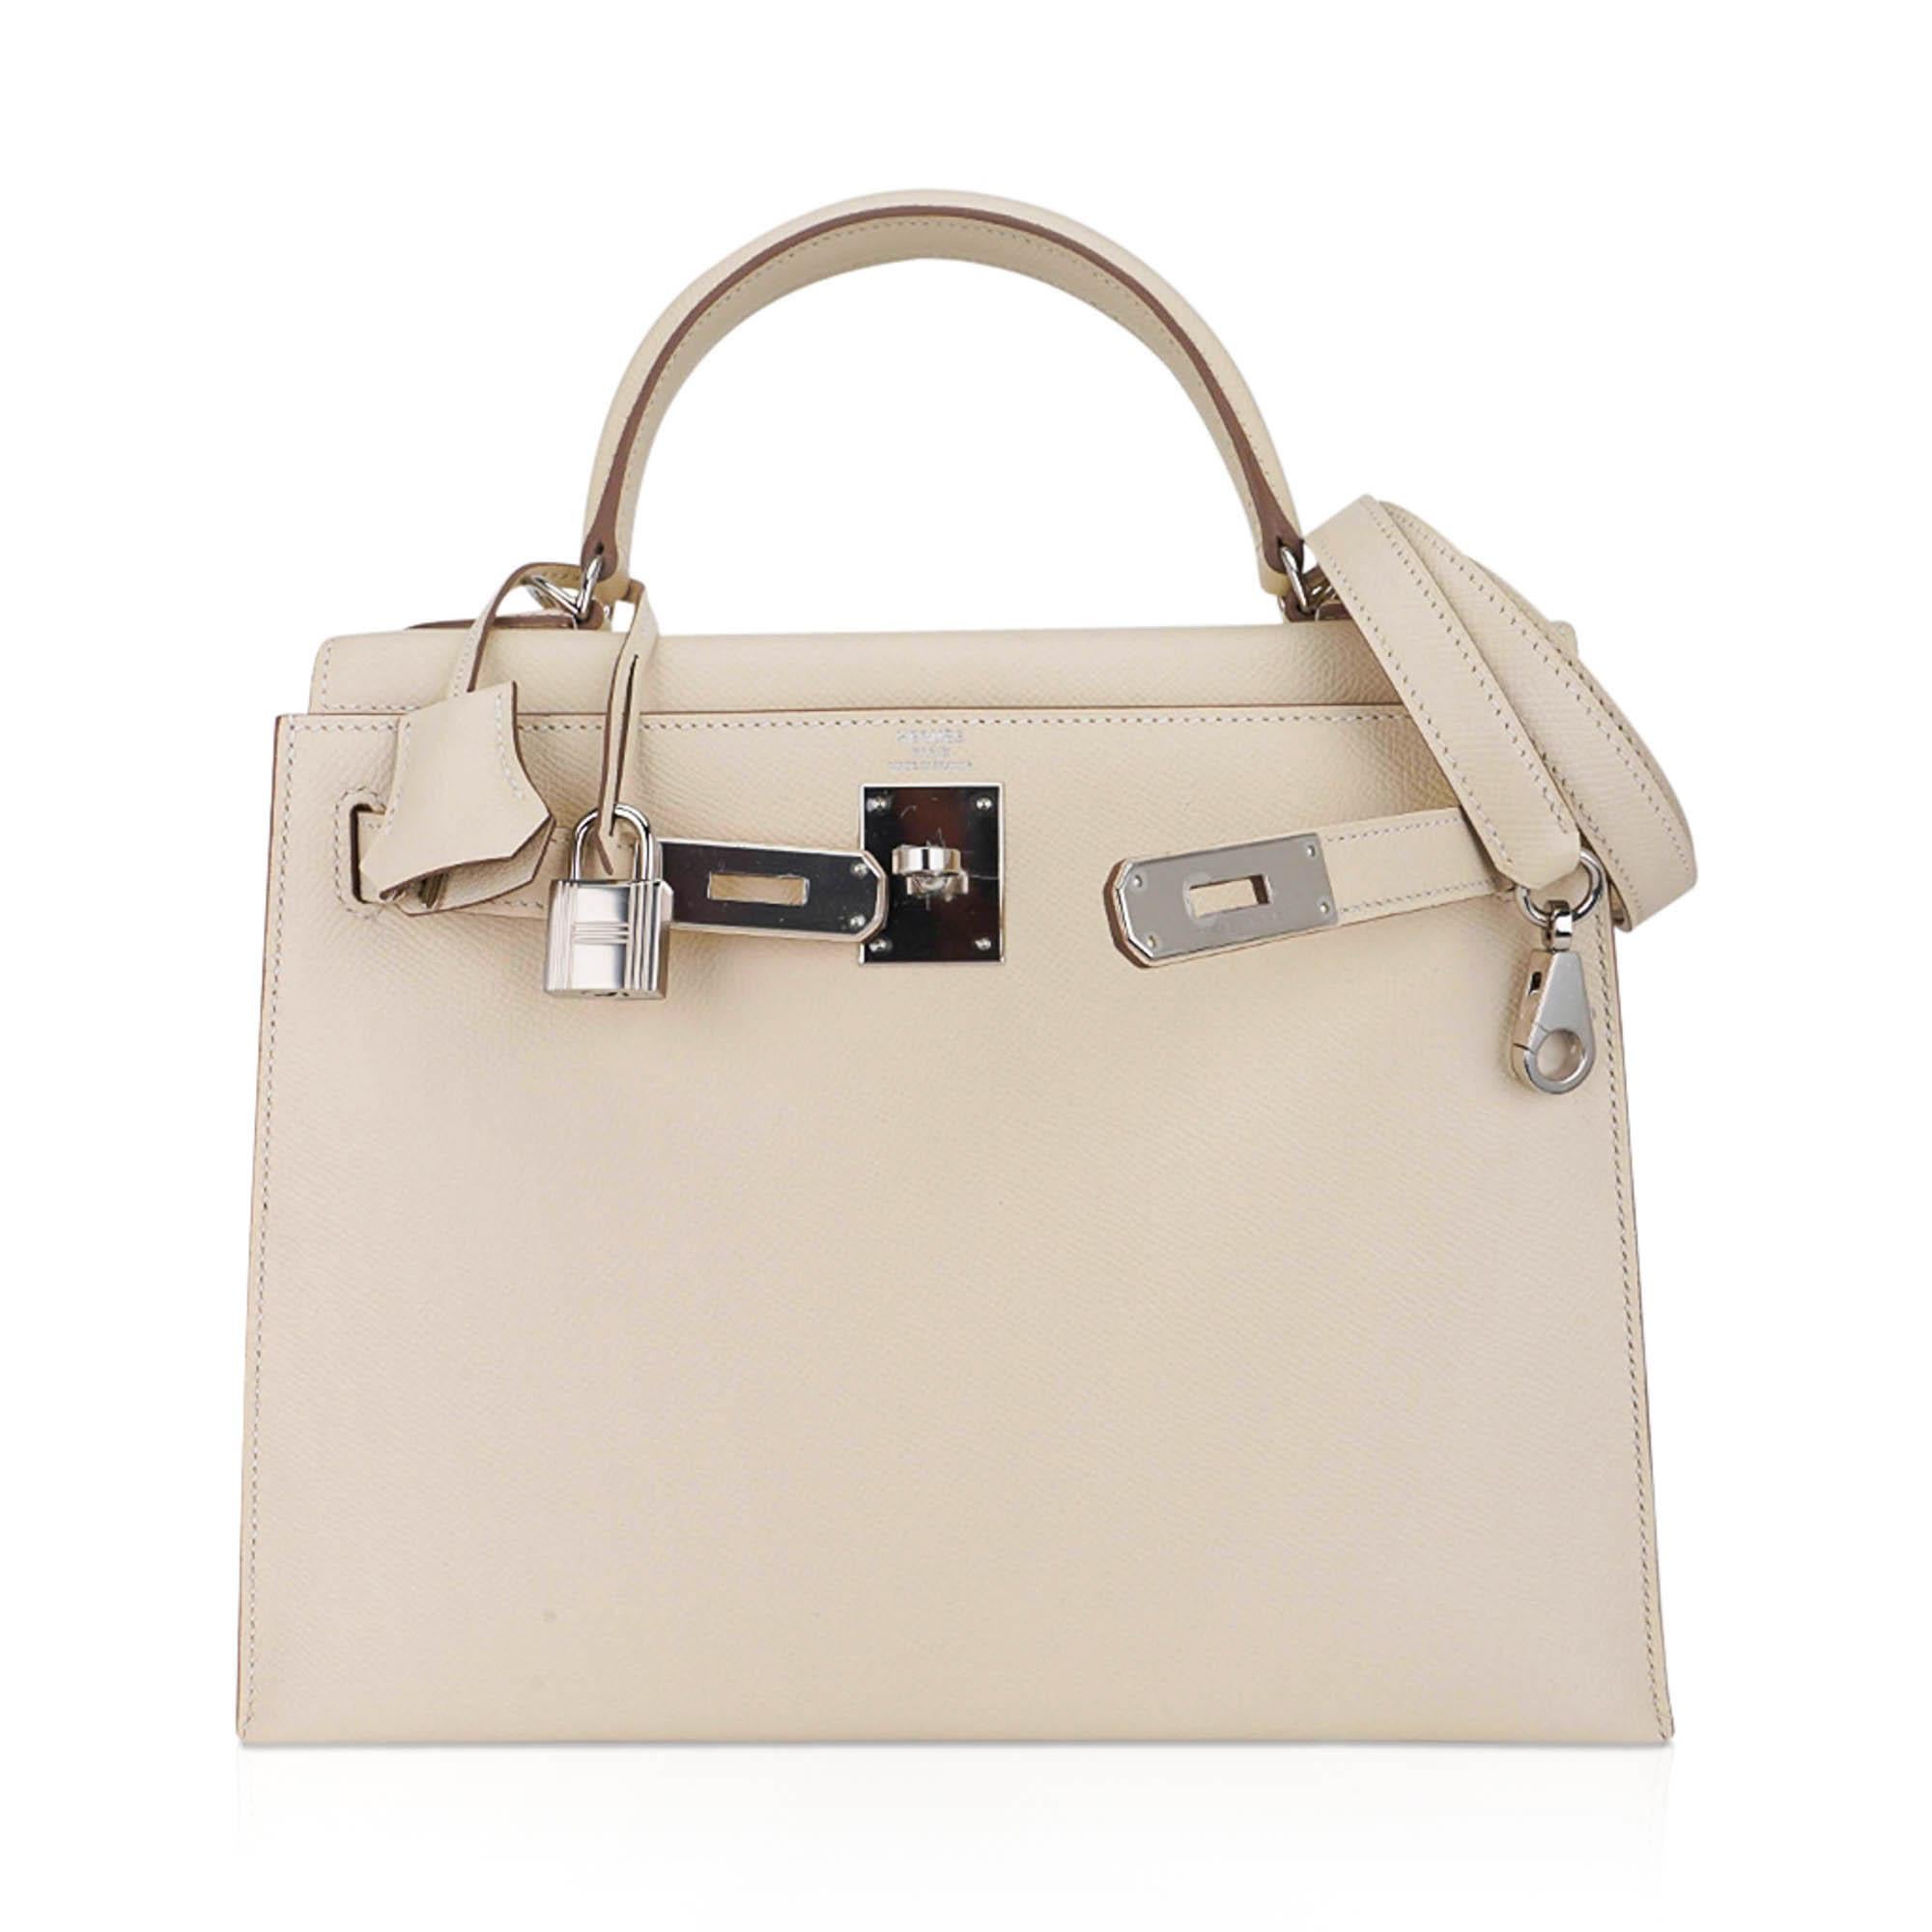 Hermes Kelly 28 Sellier Craie Bag Palladium Hardware Epsom Leather In New Condition For Sale In Miami, FL